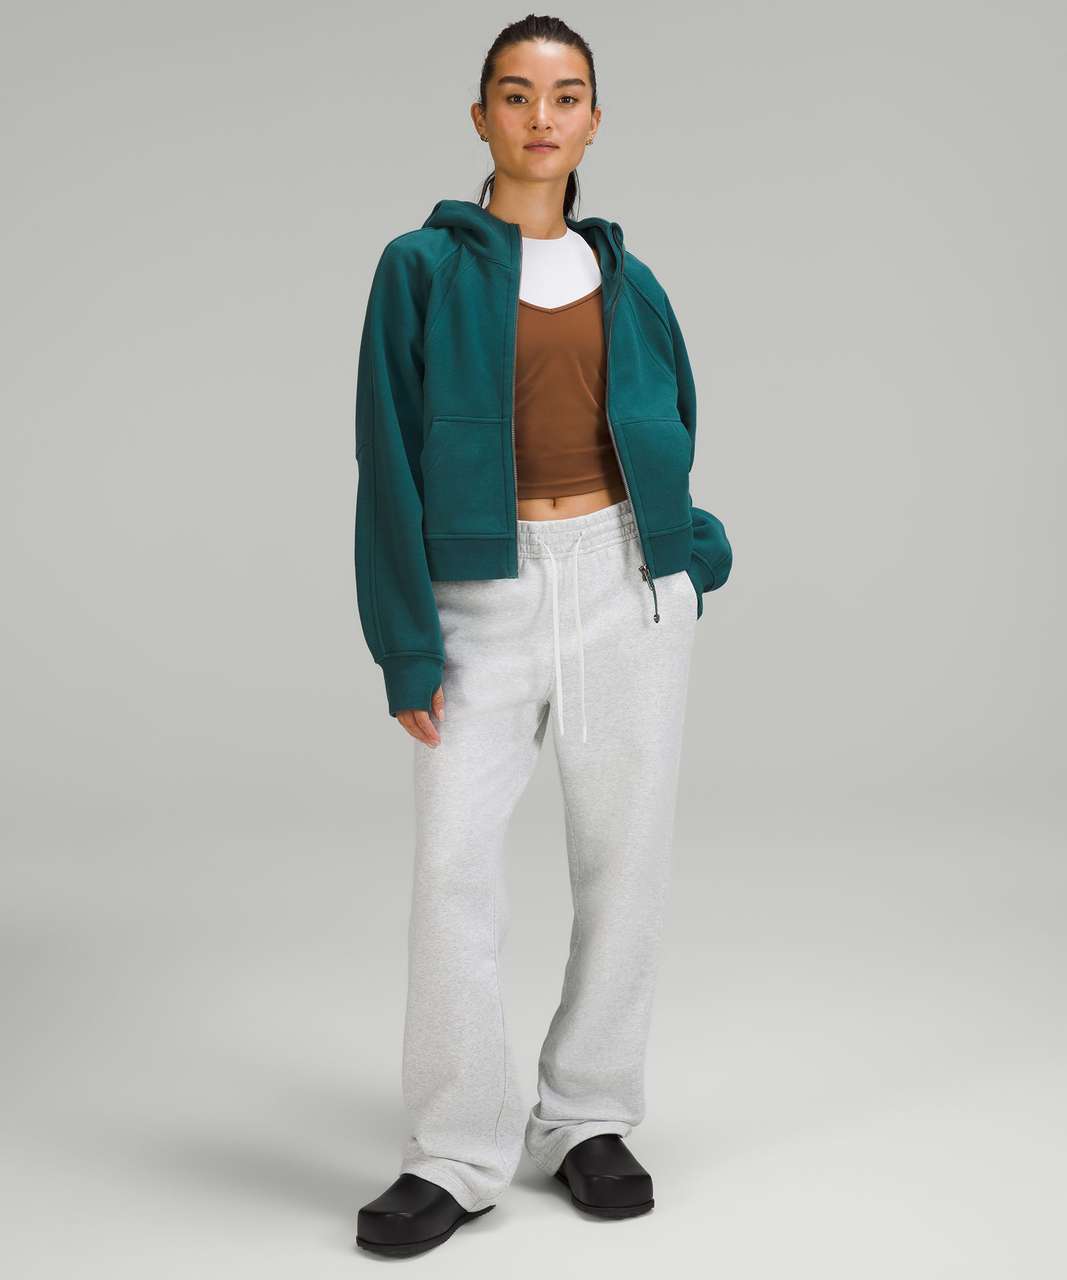 Scuba oversized full zip funnel neck in xs/S green jasper. I hate the price  but I really love this one. It kind of reminds me of a long cardigan. Plus  I can